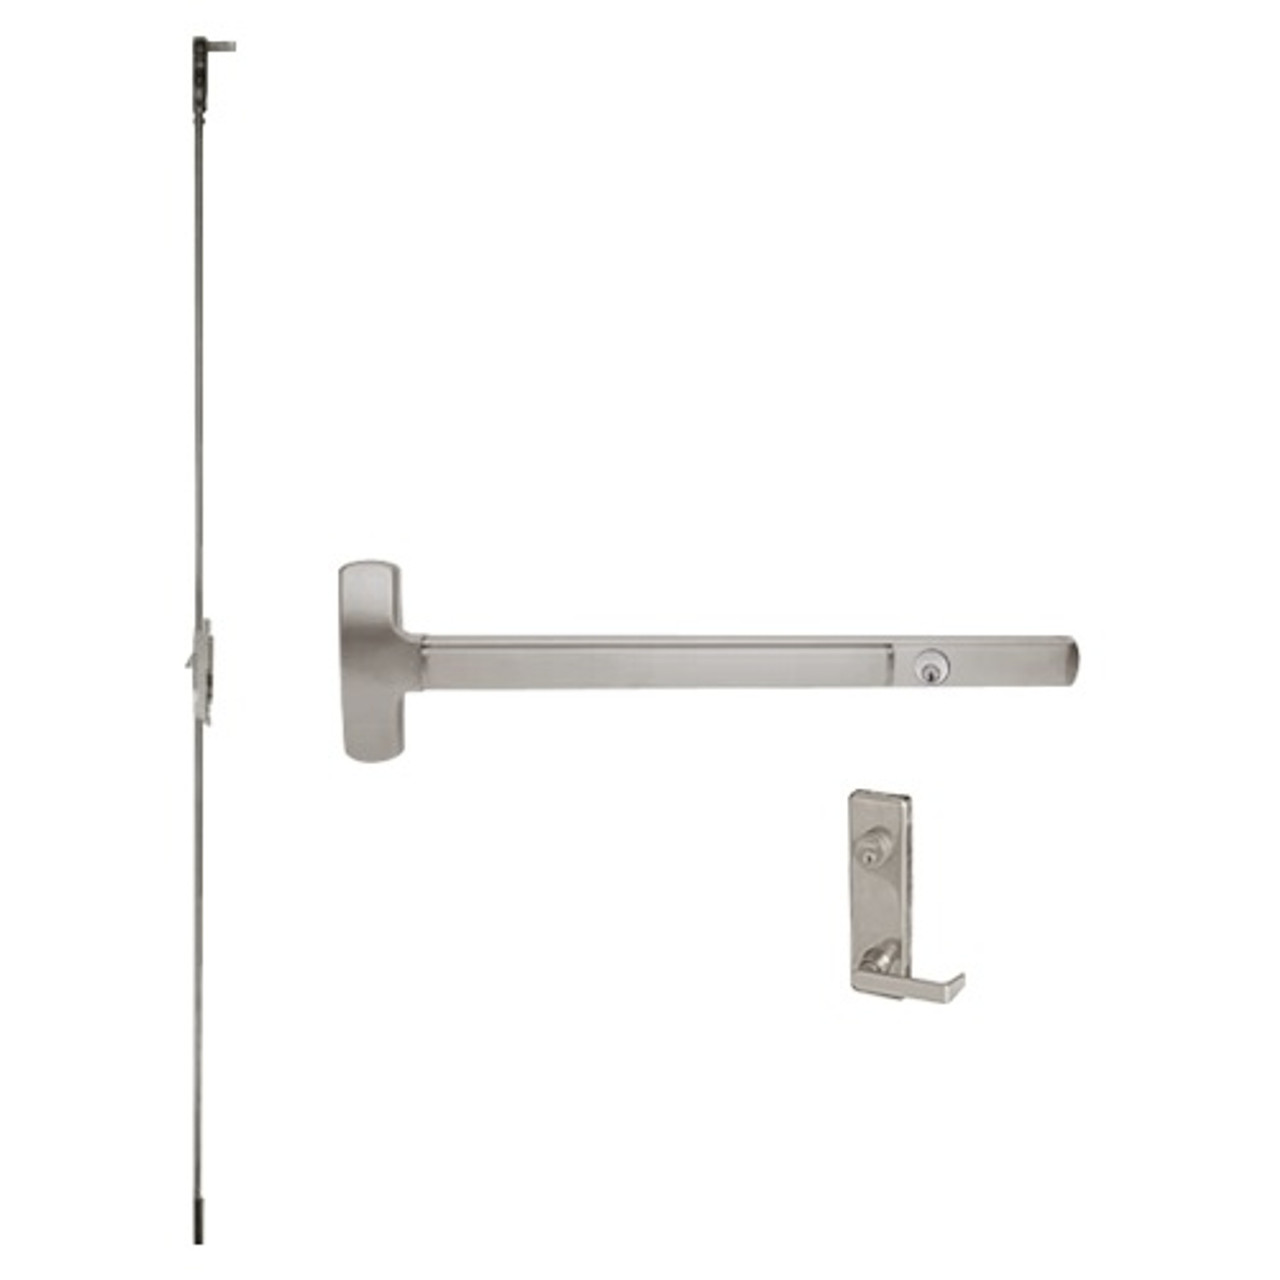 CD25-C-L-NL-DANE-US32D-2-RHR Falcon Exit Device in Satin Stainless Steel